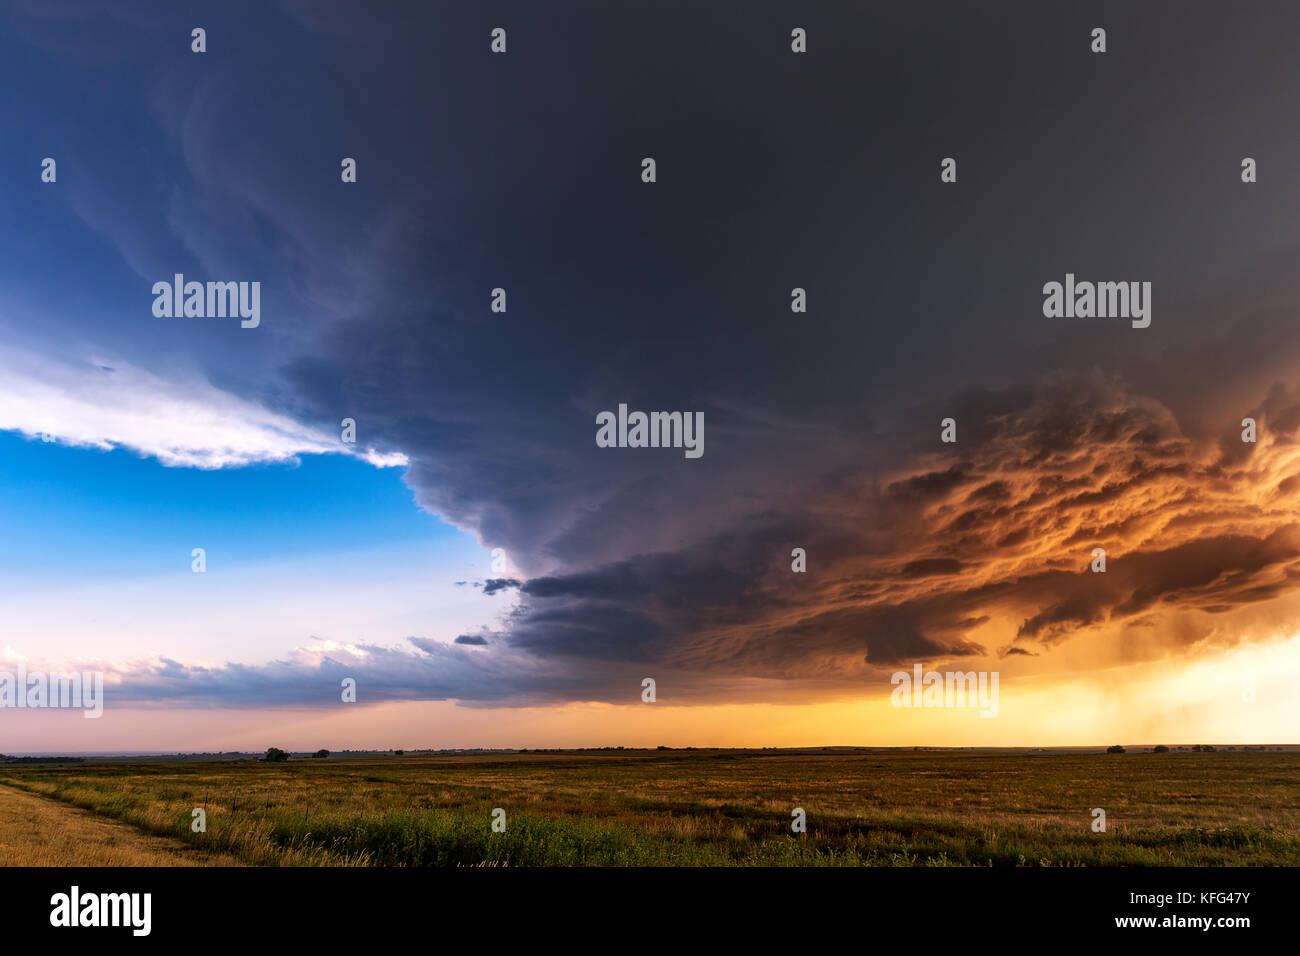 Supercell thunderstorm at sunset near Lamar, Colorado Stock Photo